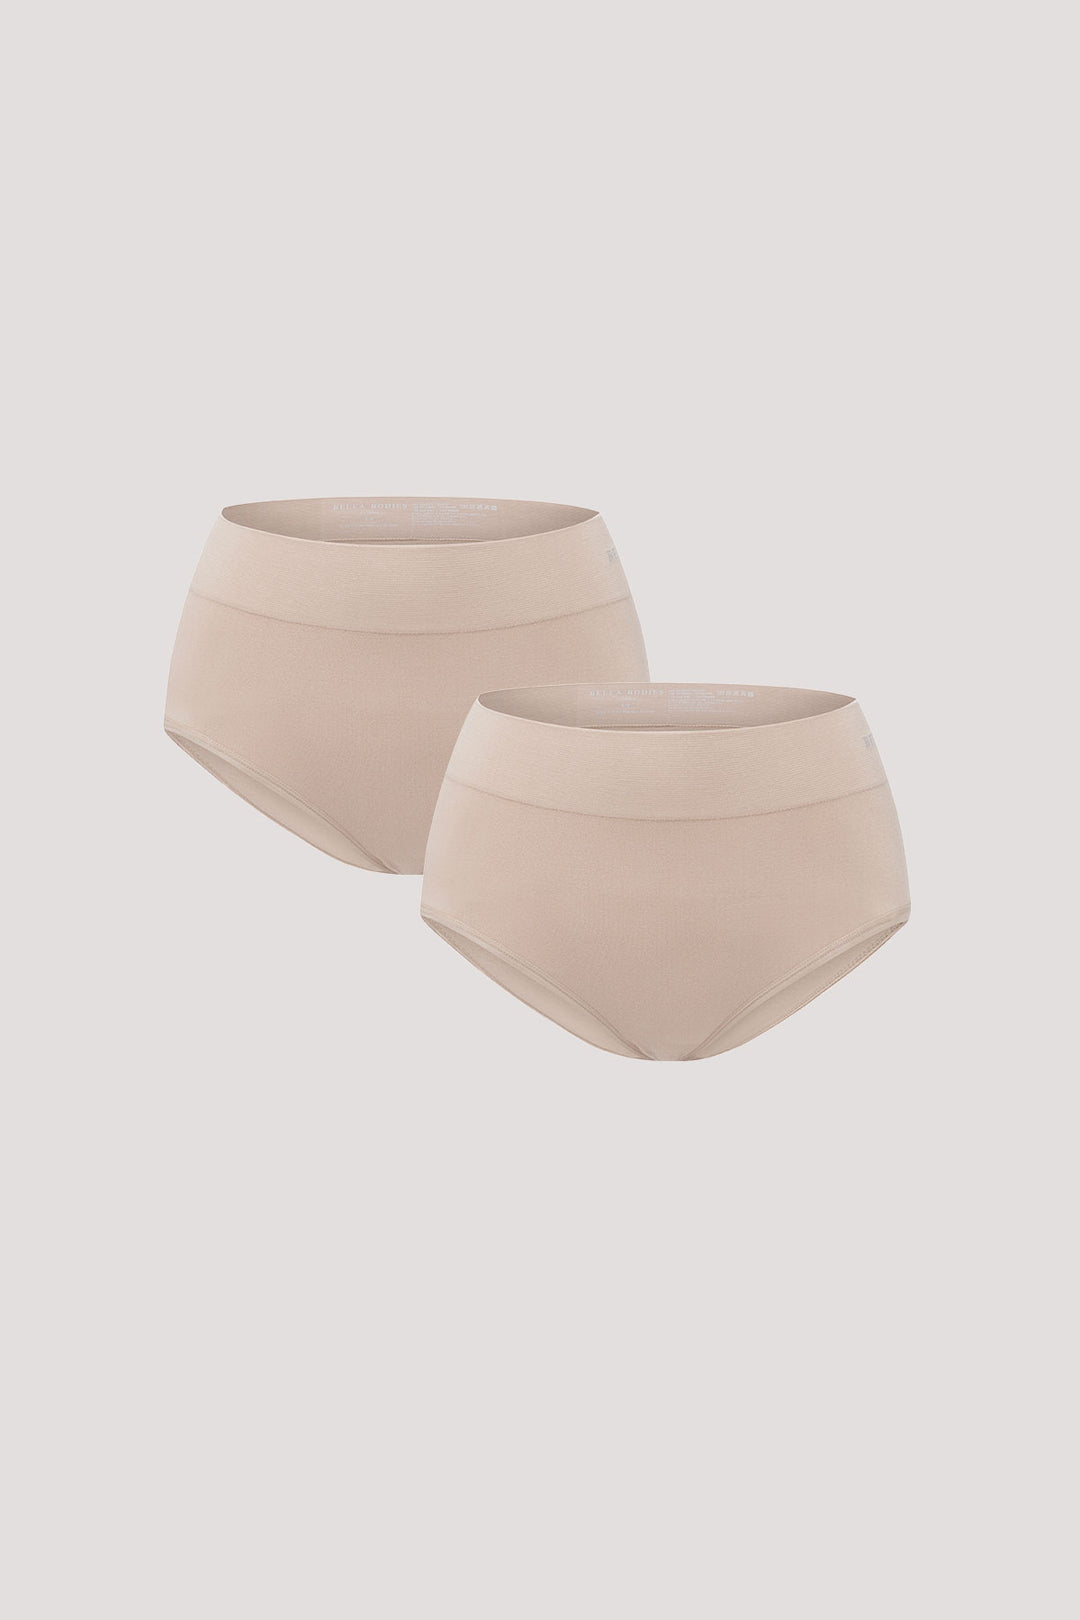  Women's Comfortable Sustainable Bamboo Underwear I Bella Bodies Australia I Bamboo Knickers | sand and sand